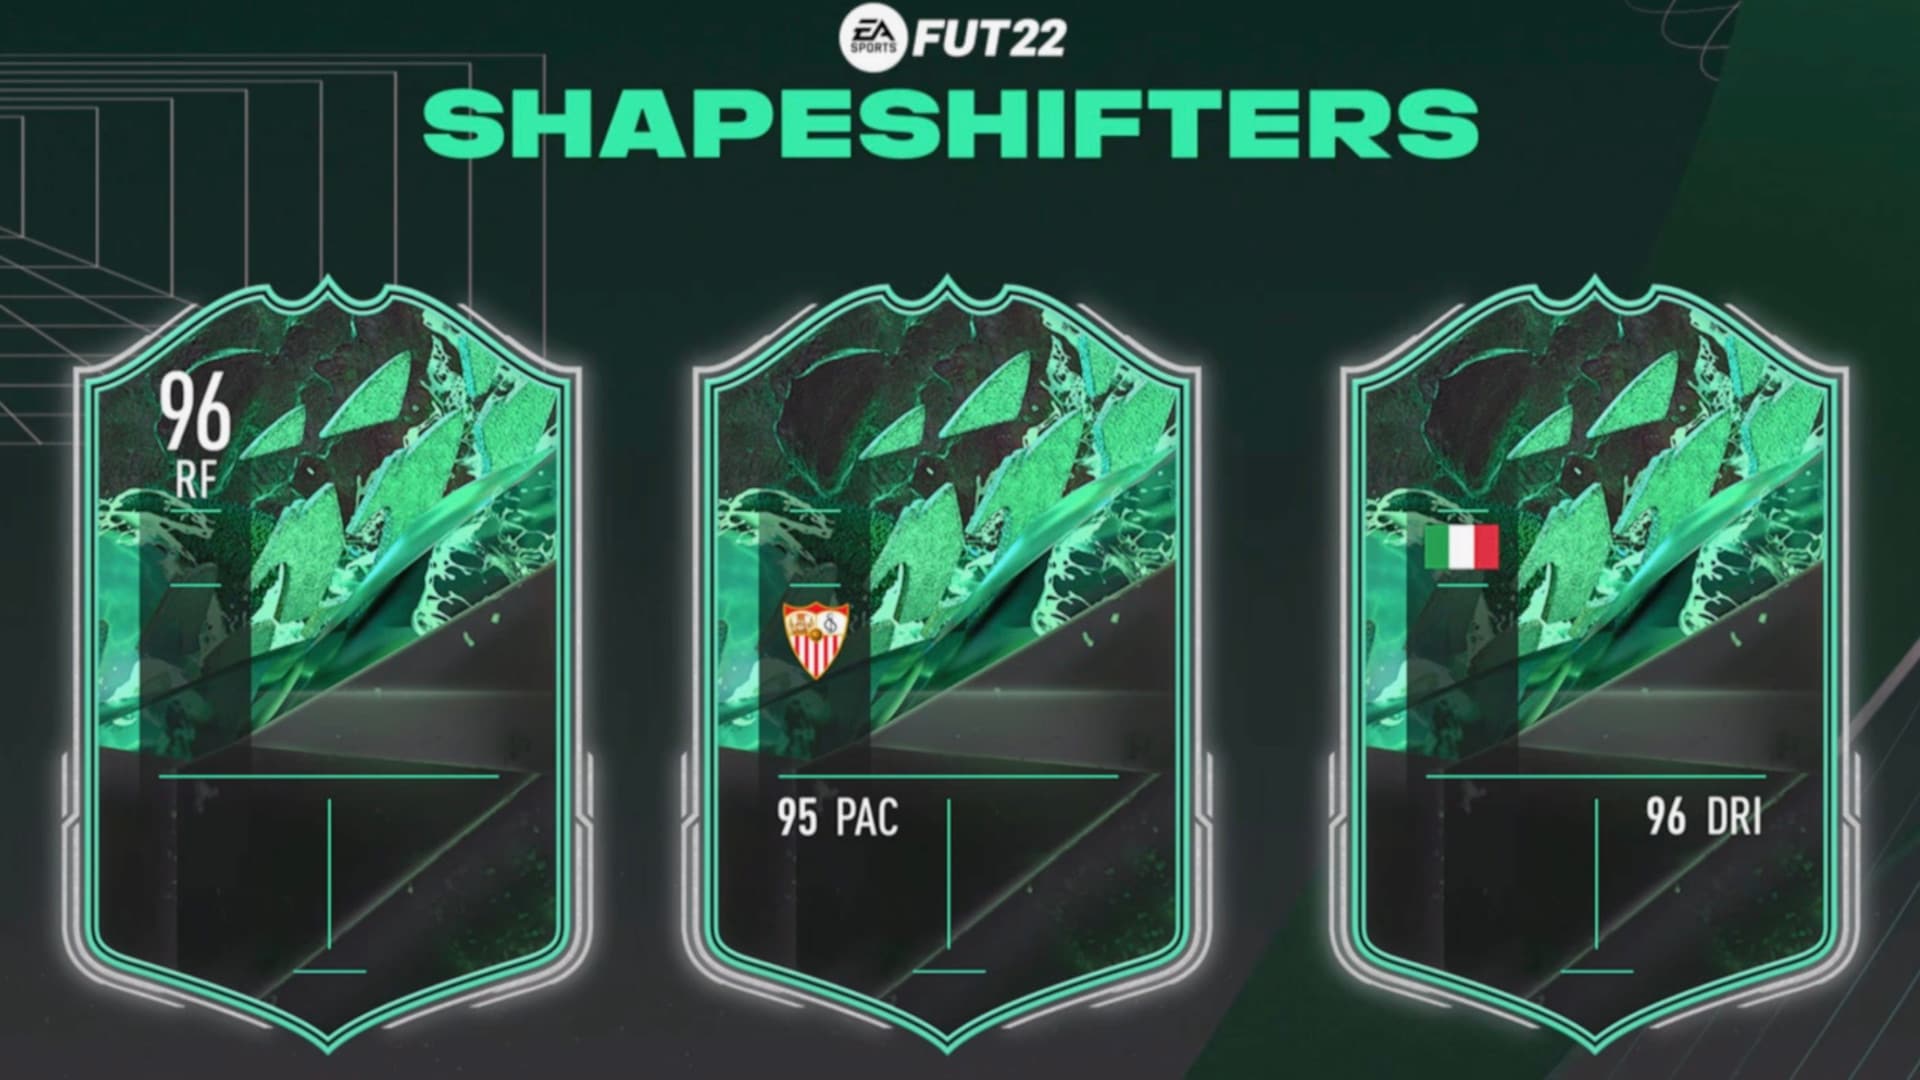 FIFA 22: Shapeshifters Team 2 is coming today – leaks promise top cards